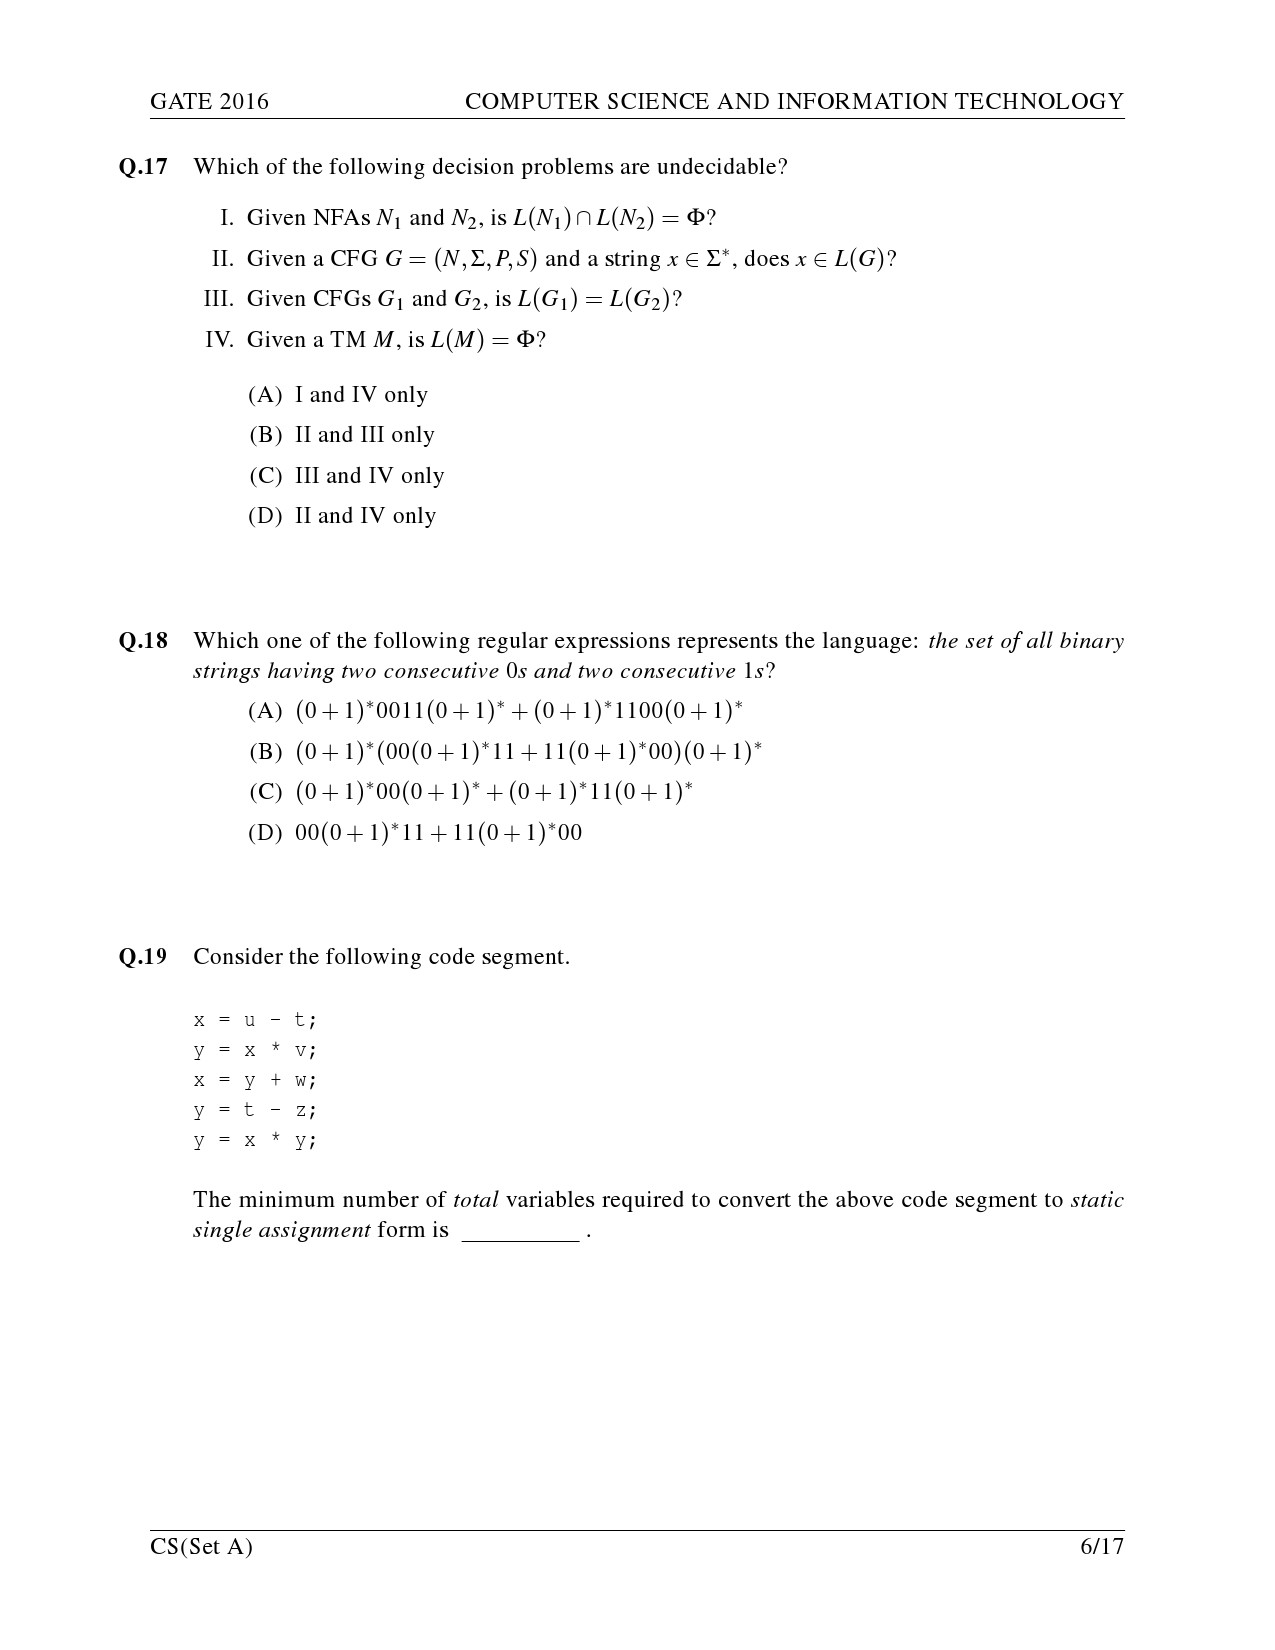 GATE Exam Question Paper 2016 Computer Science and Information Technology Set A 9